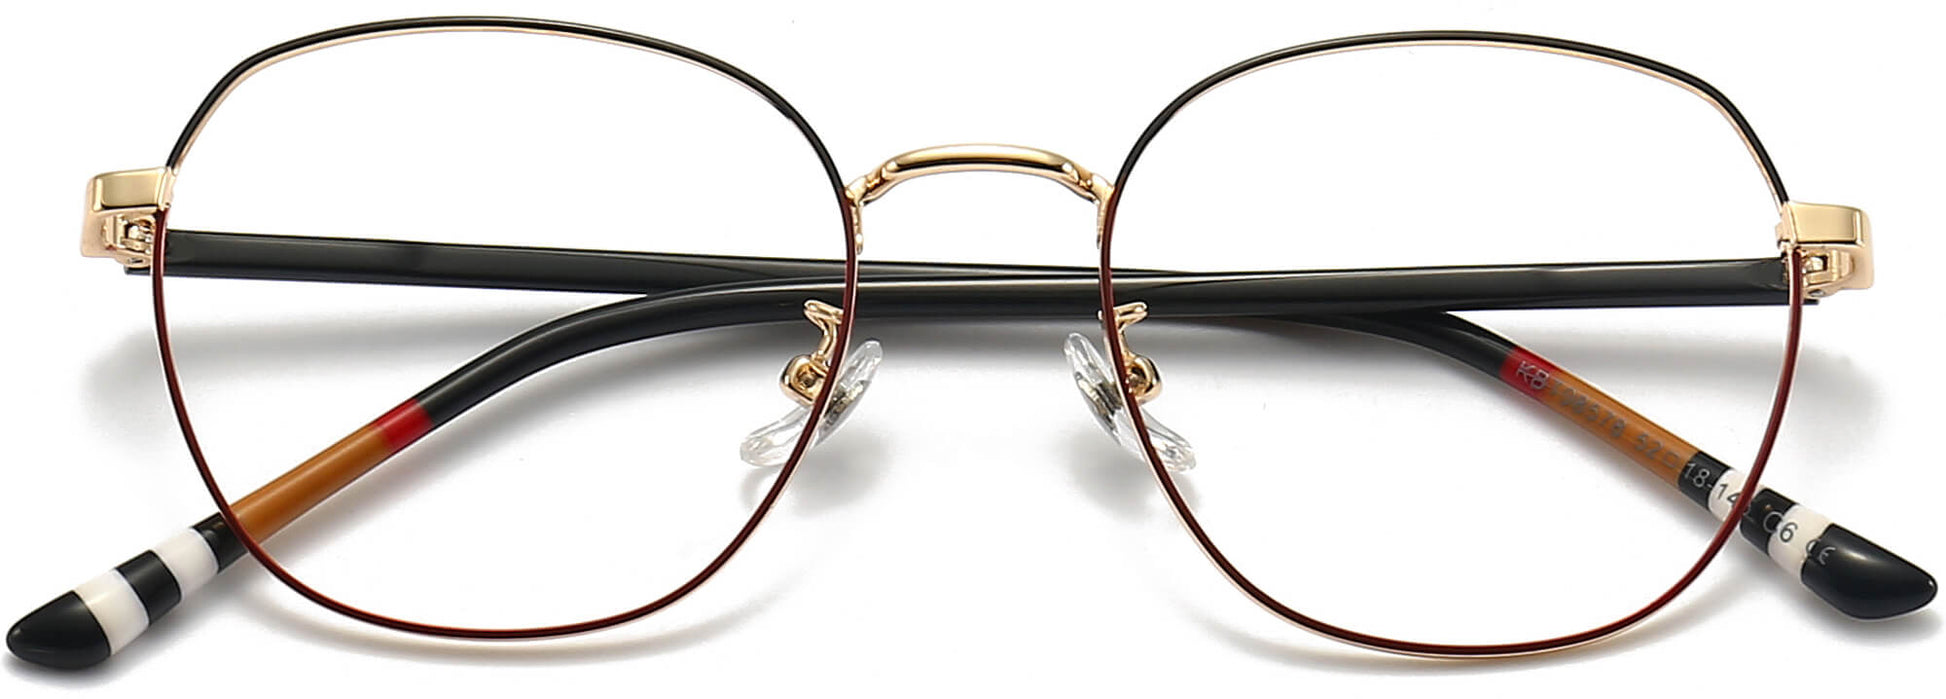 Mallory Round Black Eyeglasses from ANRRI, closed view